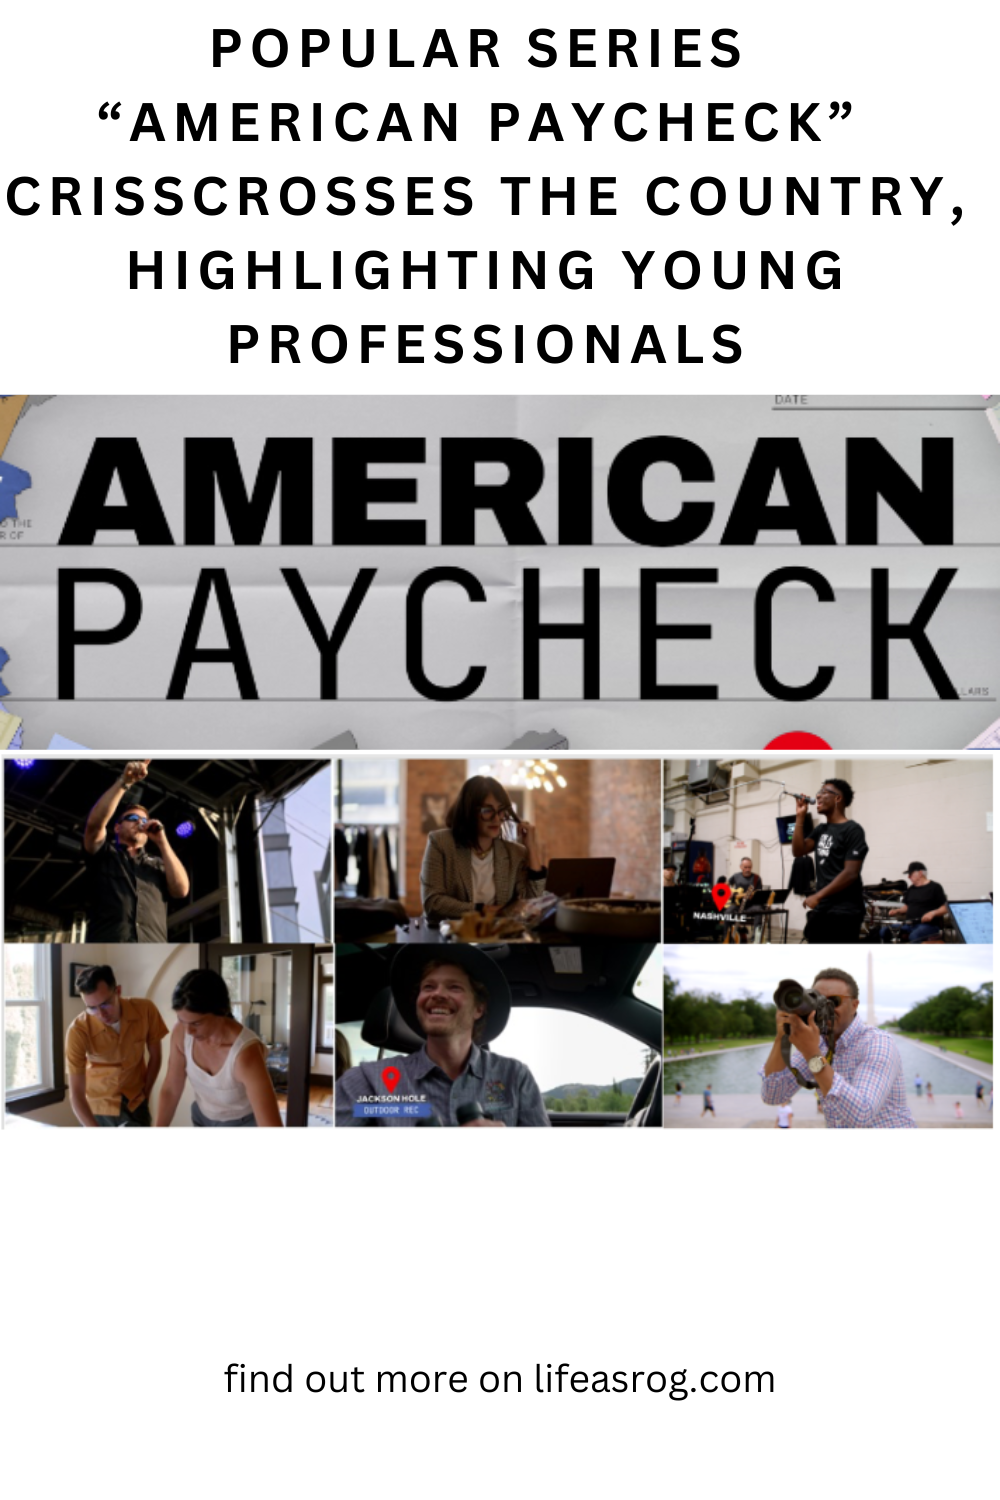 popular series “american paycheck” crisscrosses the country, highlighting young professionals